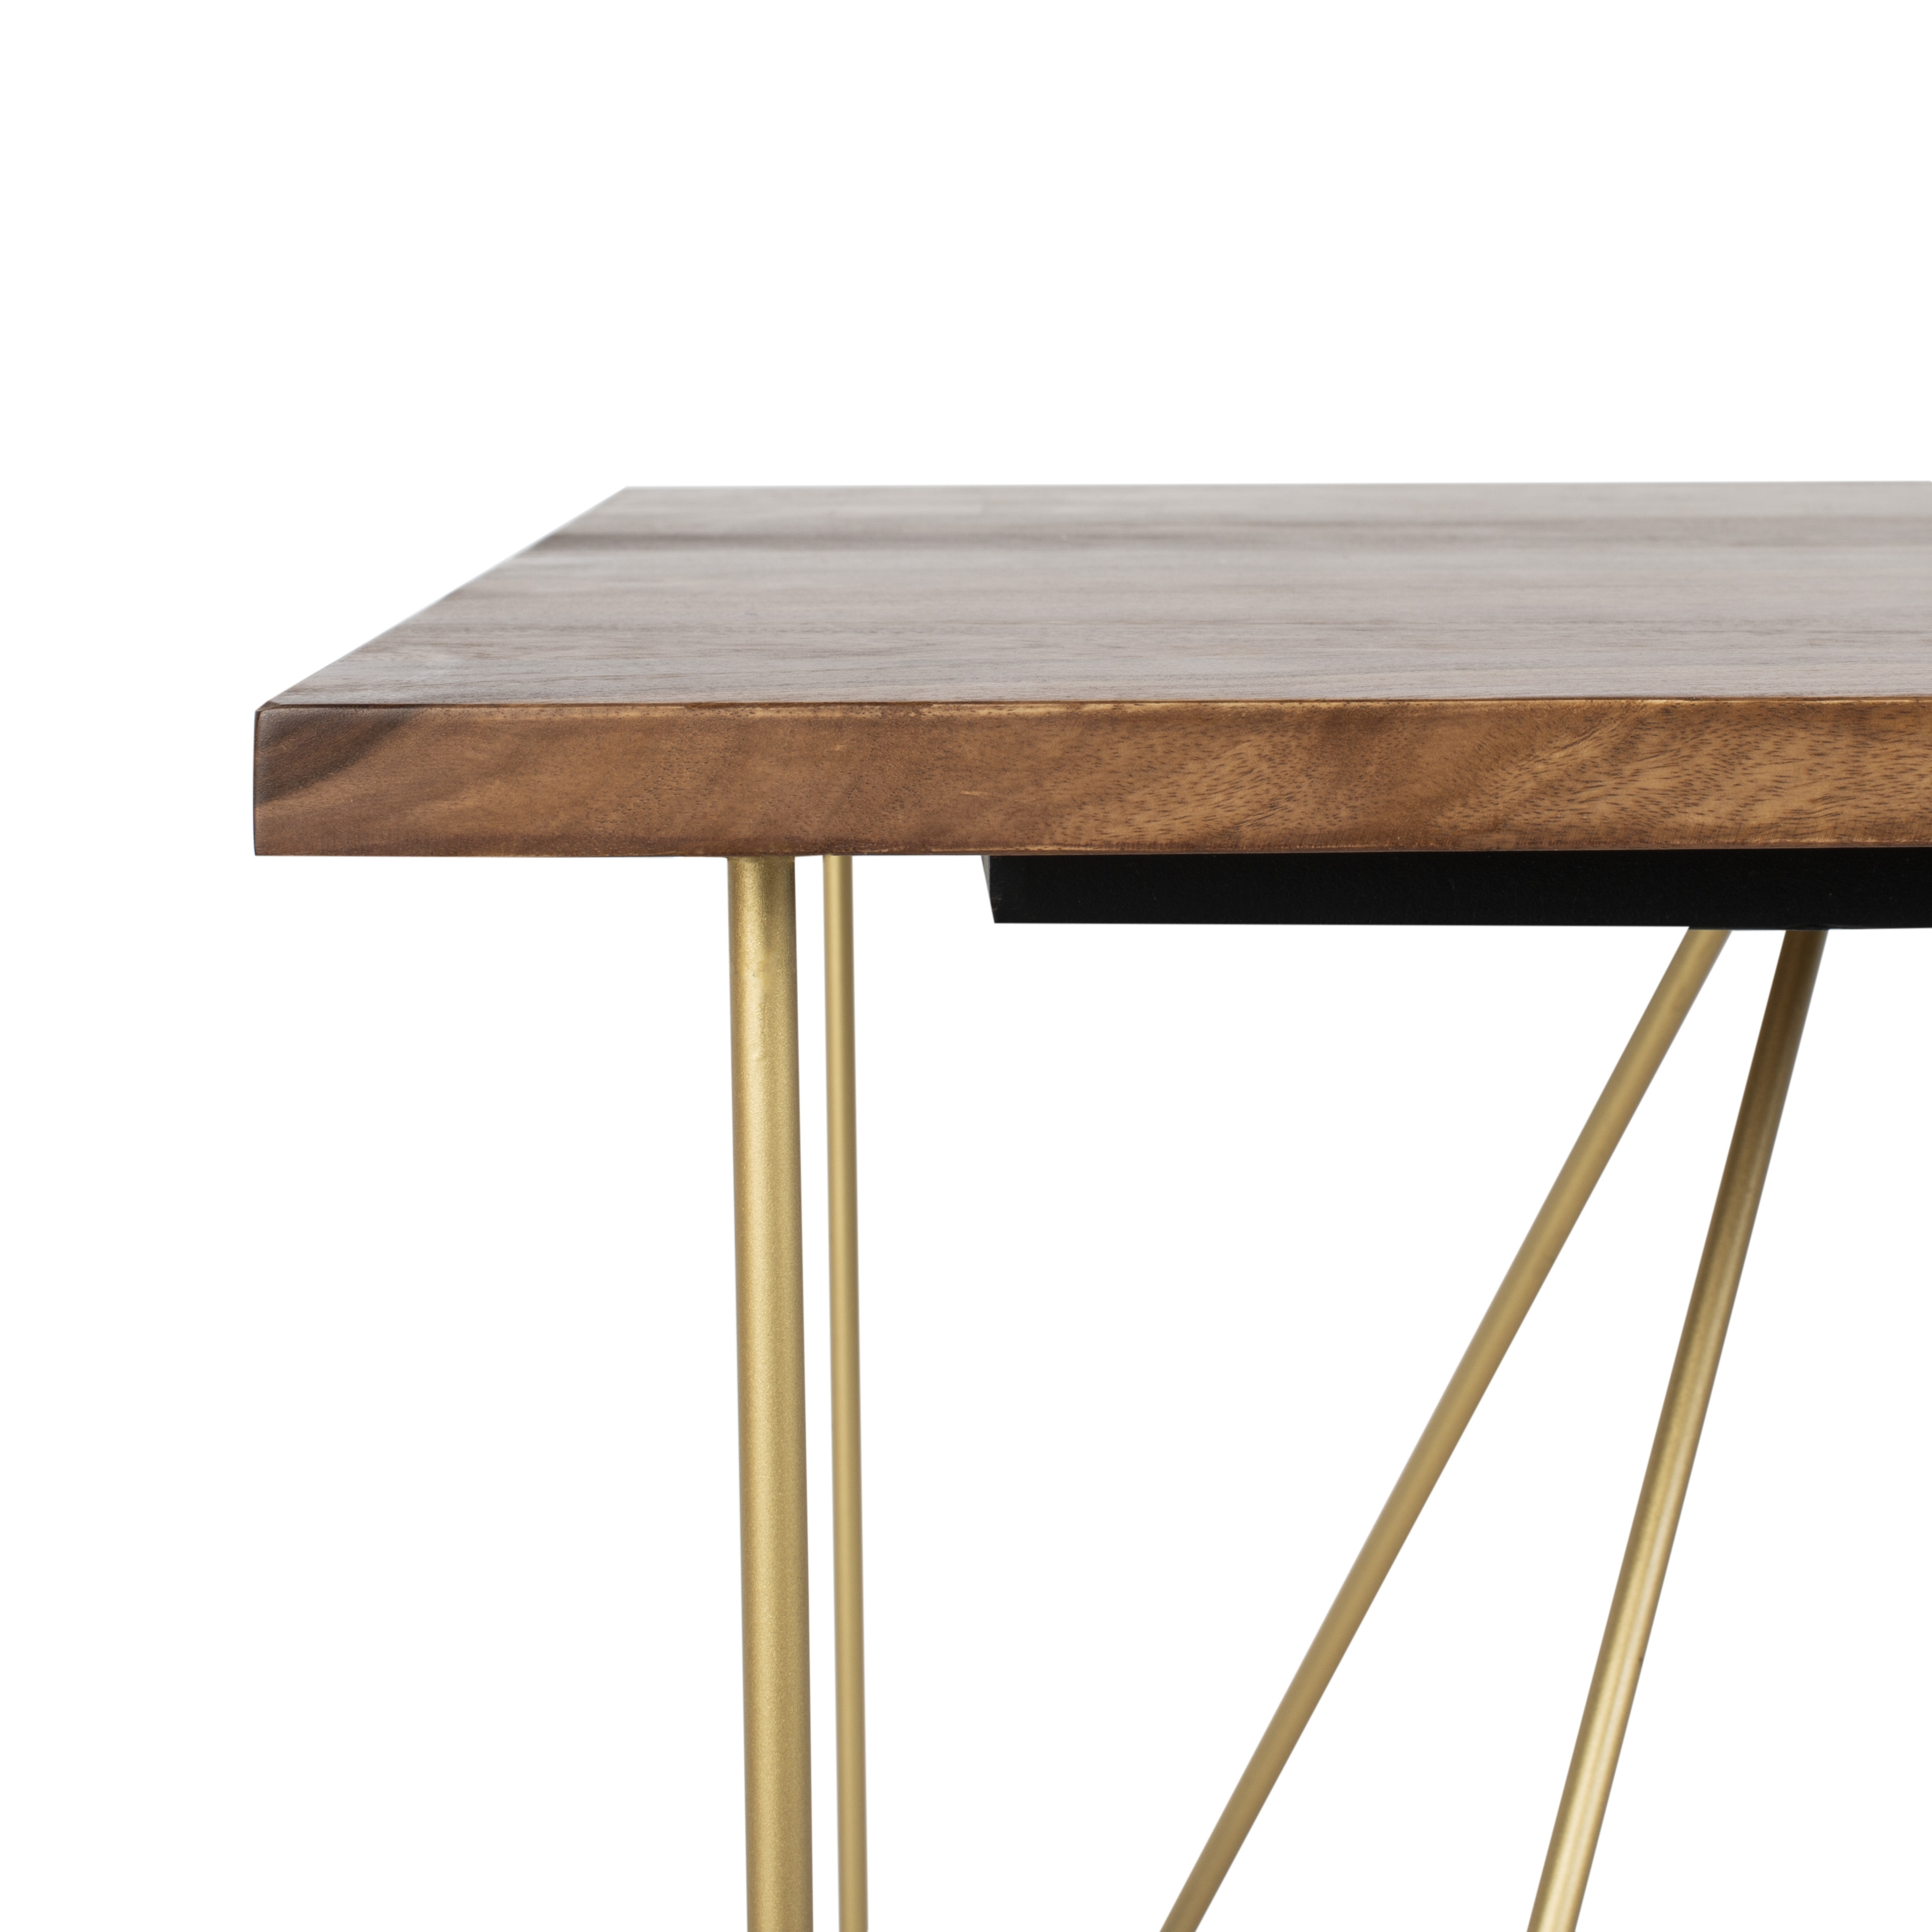 Captain Hairpin Legs Wood Dining Table - Walnut/Brass - Arlo Home - Image 3